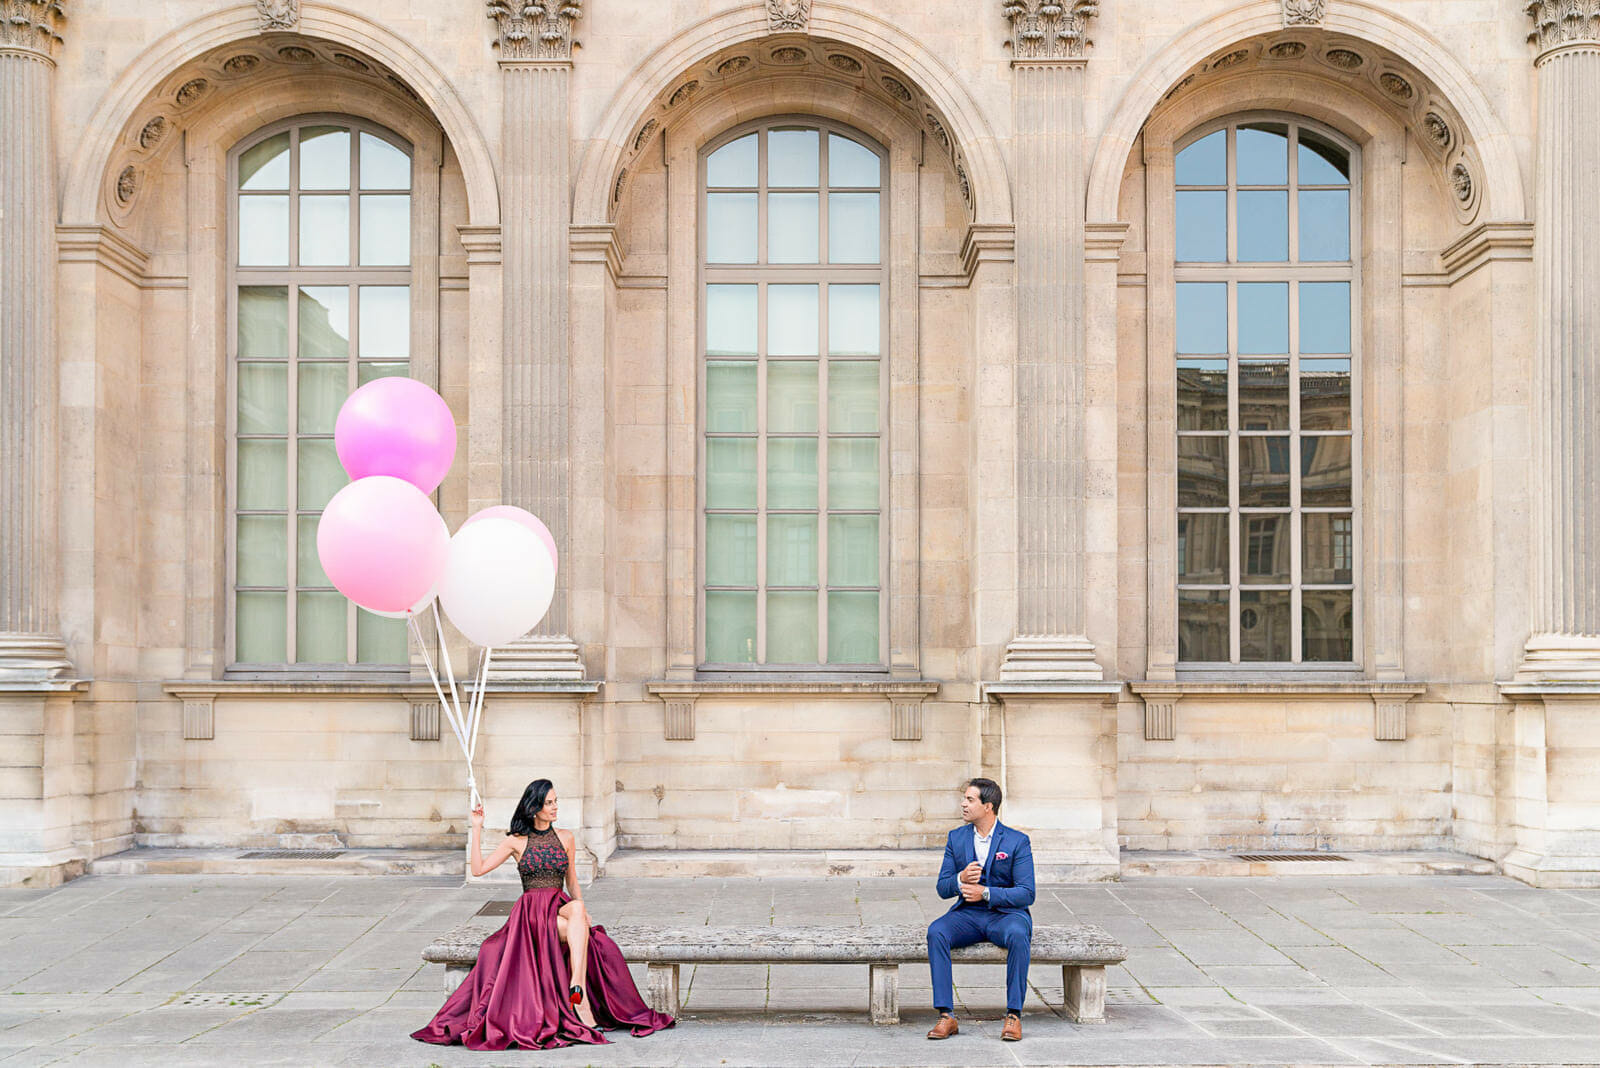 Paris couple photo shoot with balloons as prop at the Louvre Museum